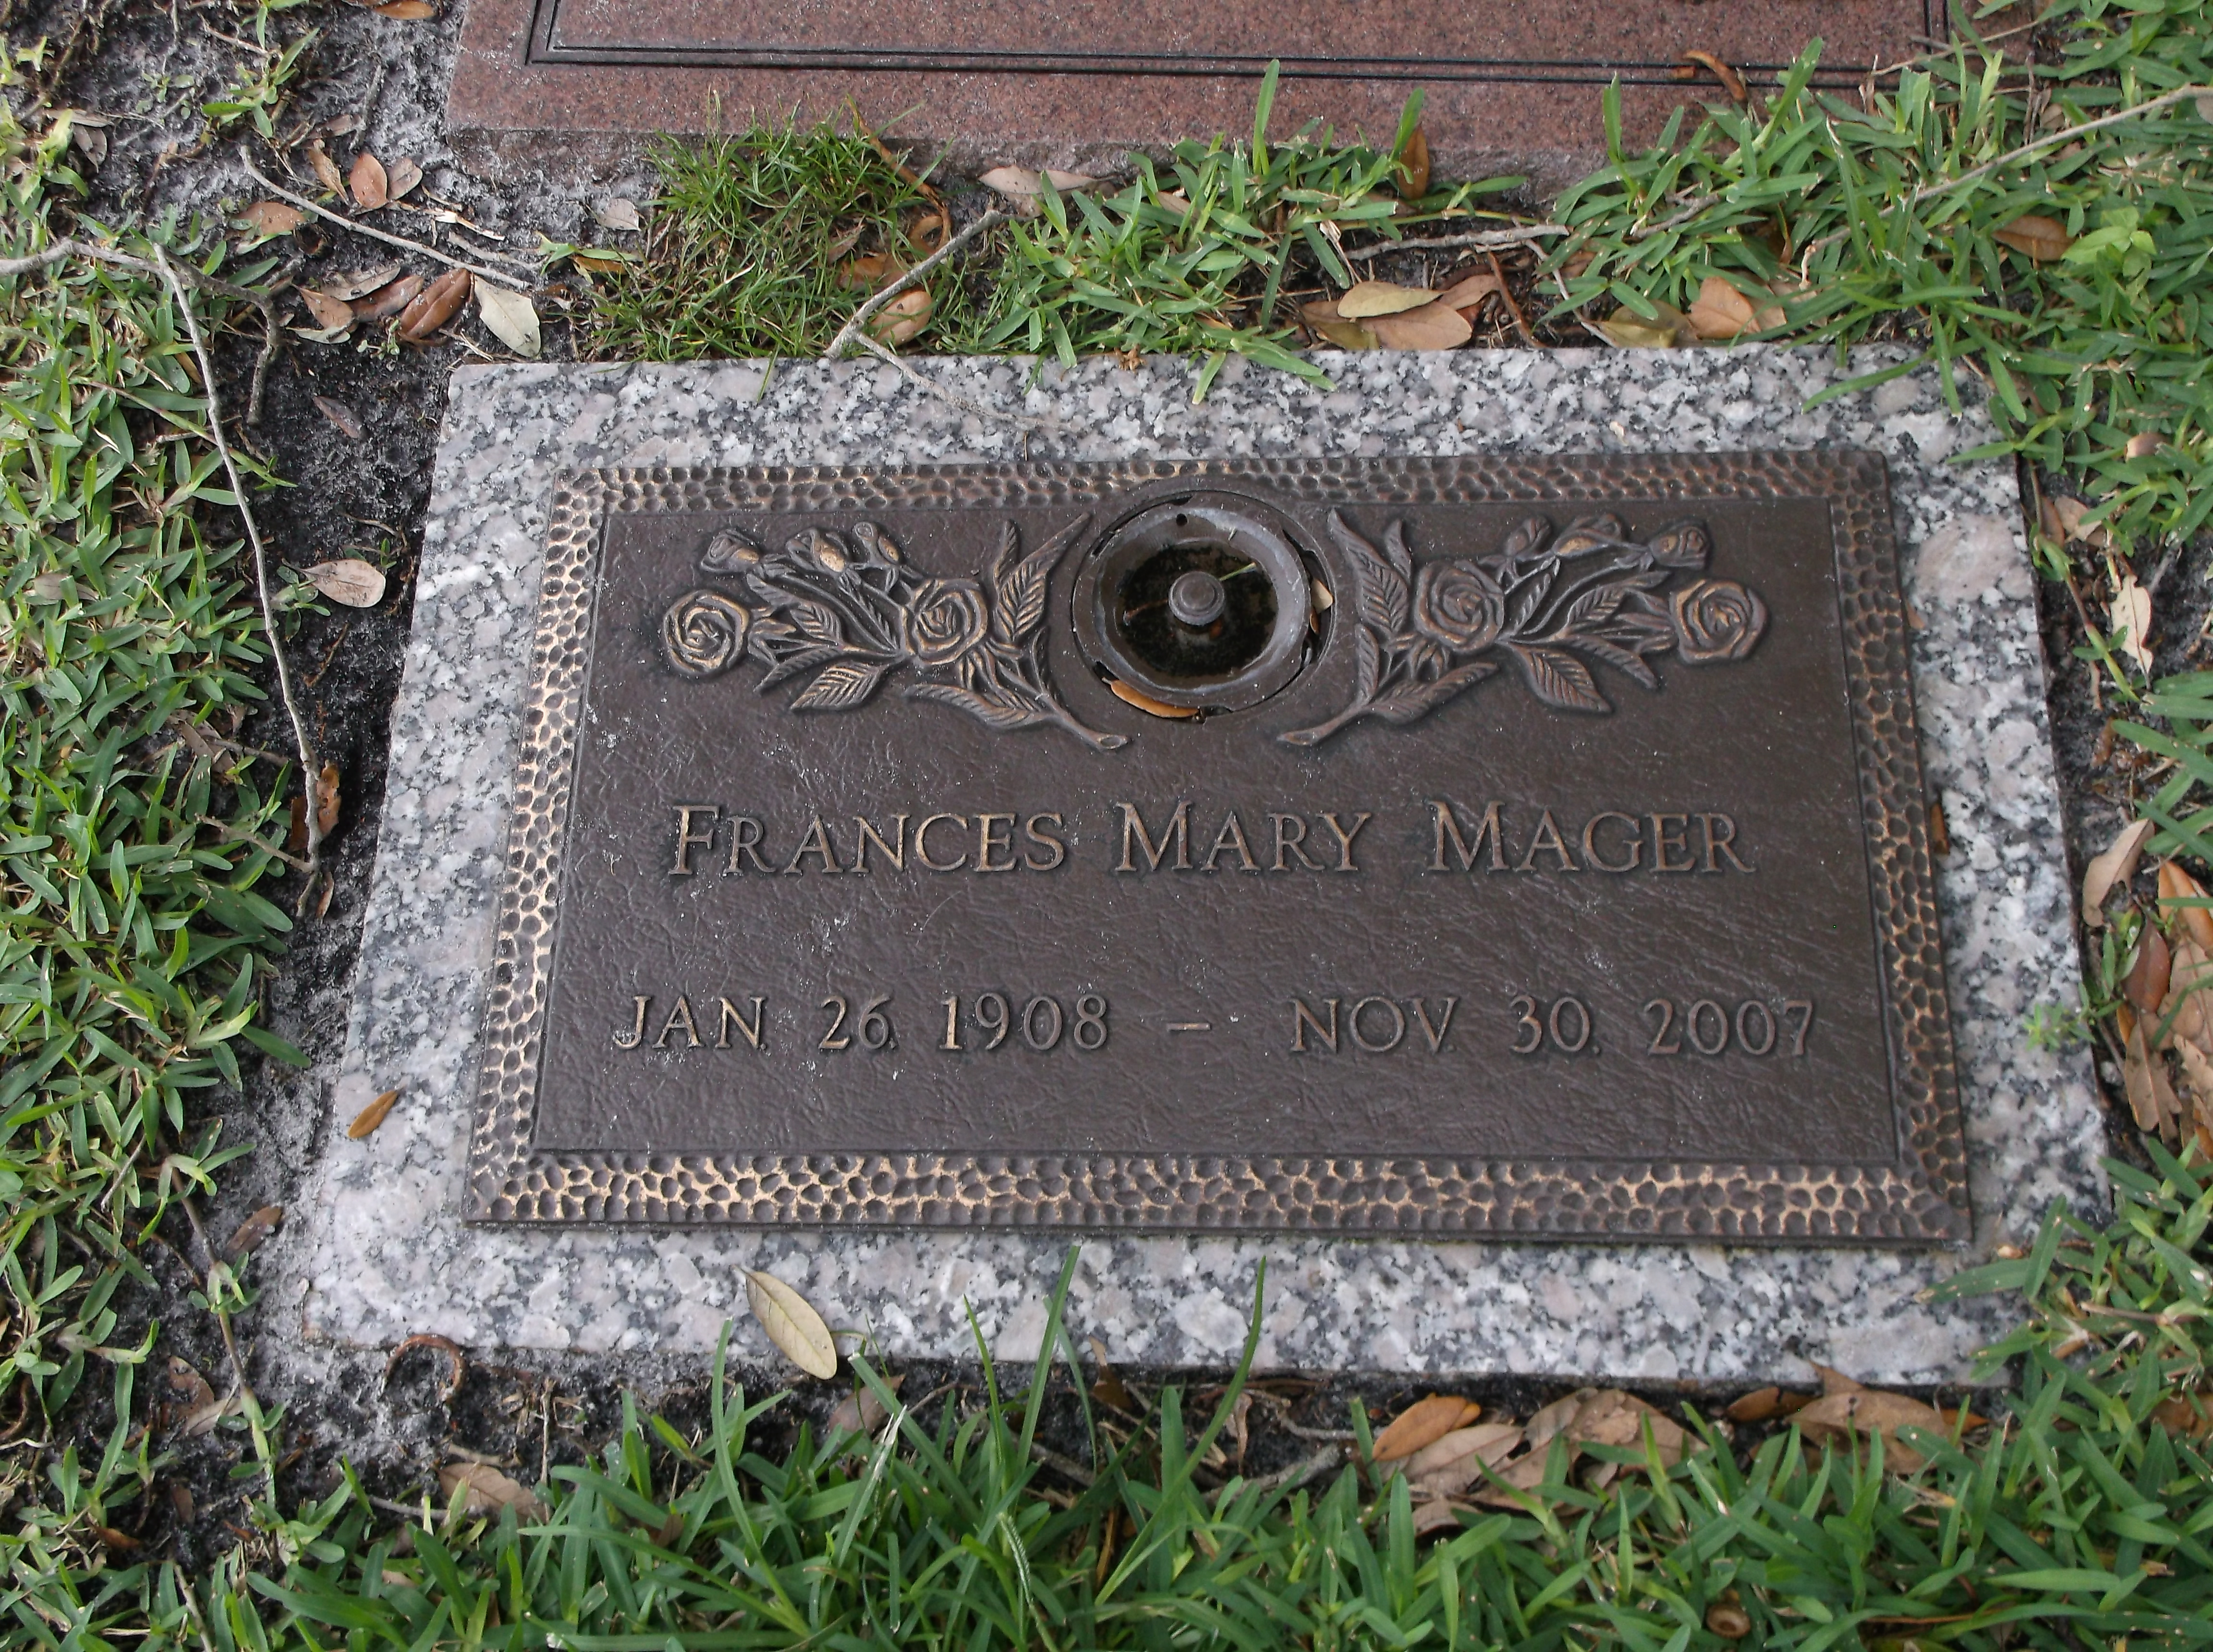 Frances Mary Mager